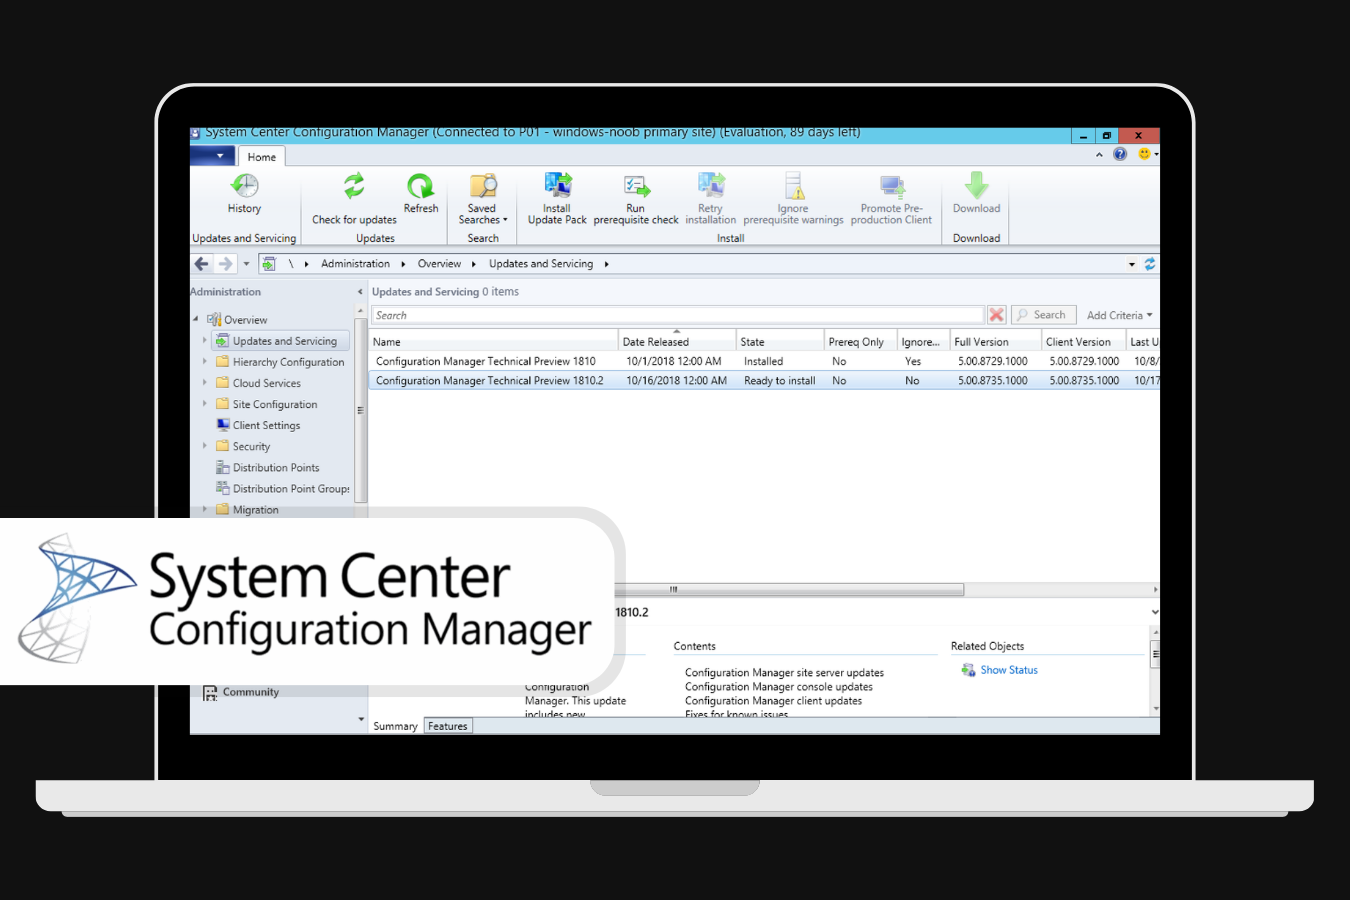 Microsoft's System Center Configuration Manager